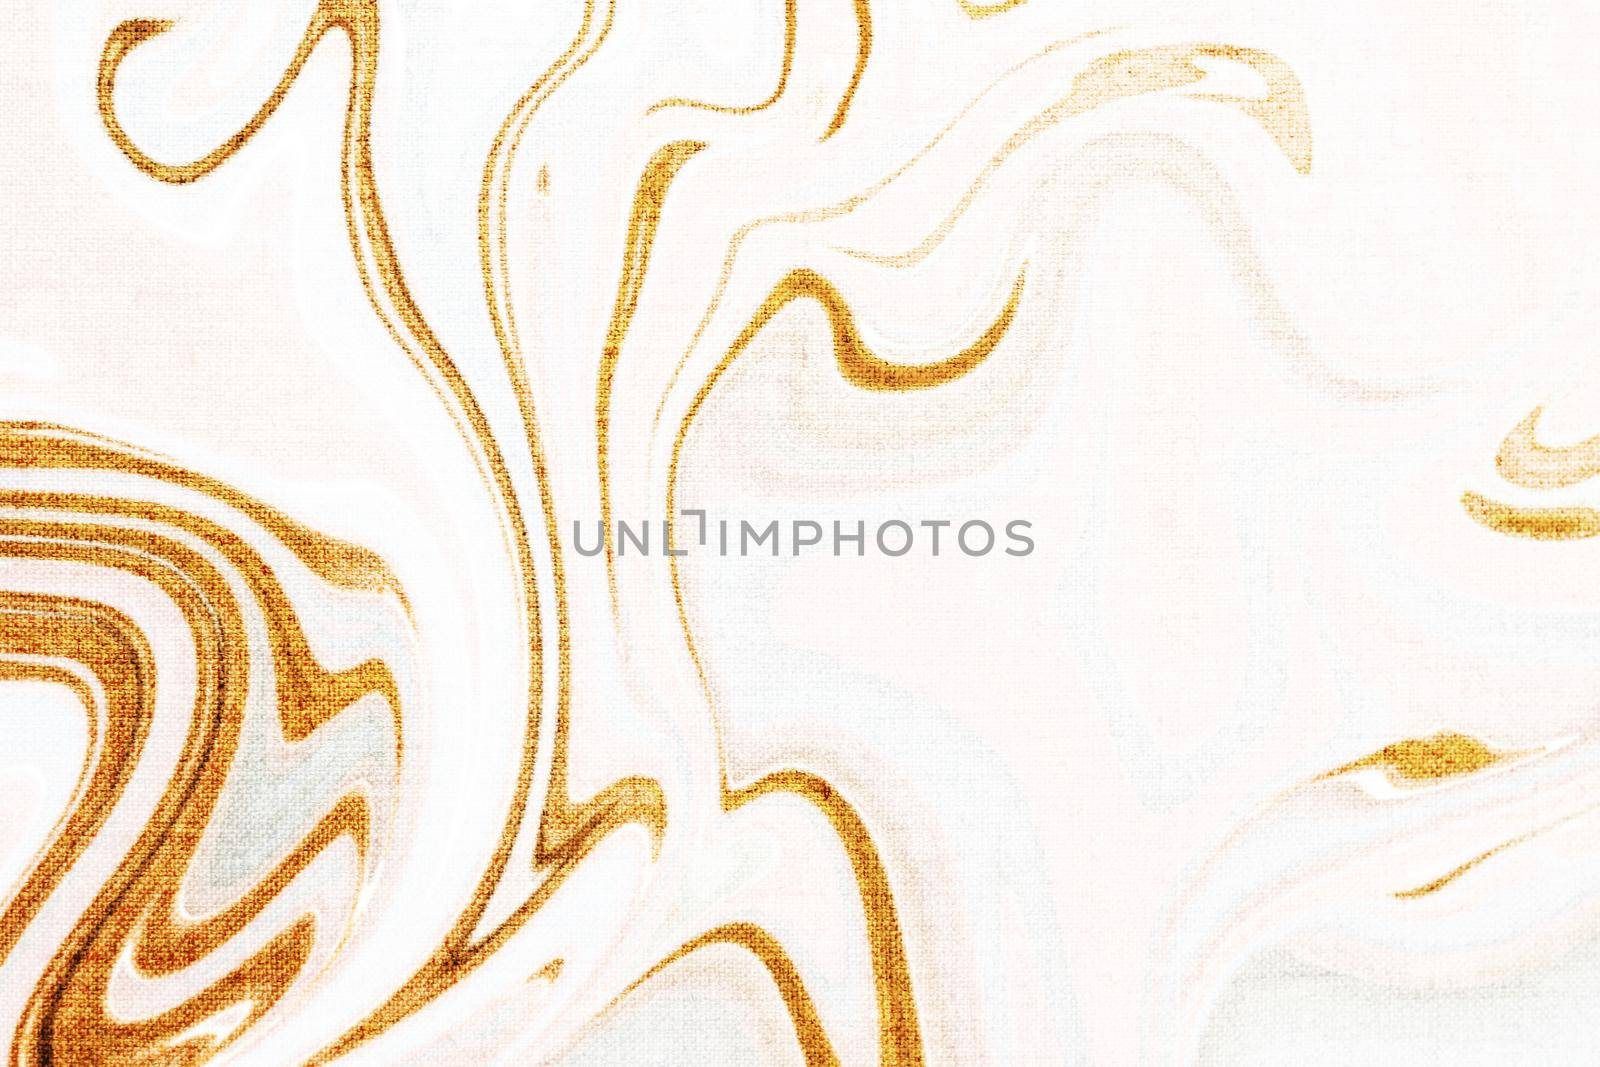 Interior design, home fabrics and wall decor concept - Marble texture textile background, abstract marbling art on canvas